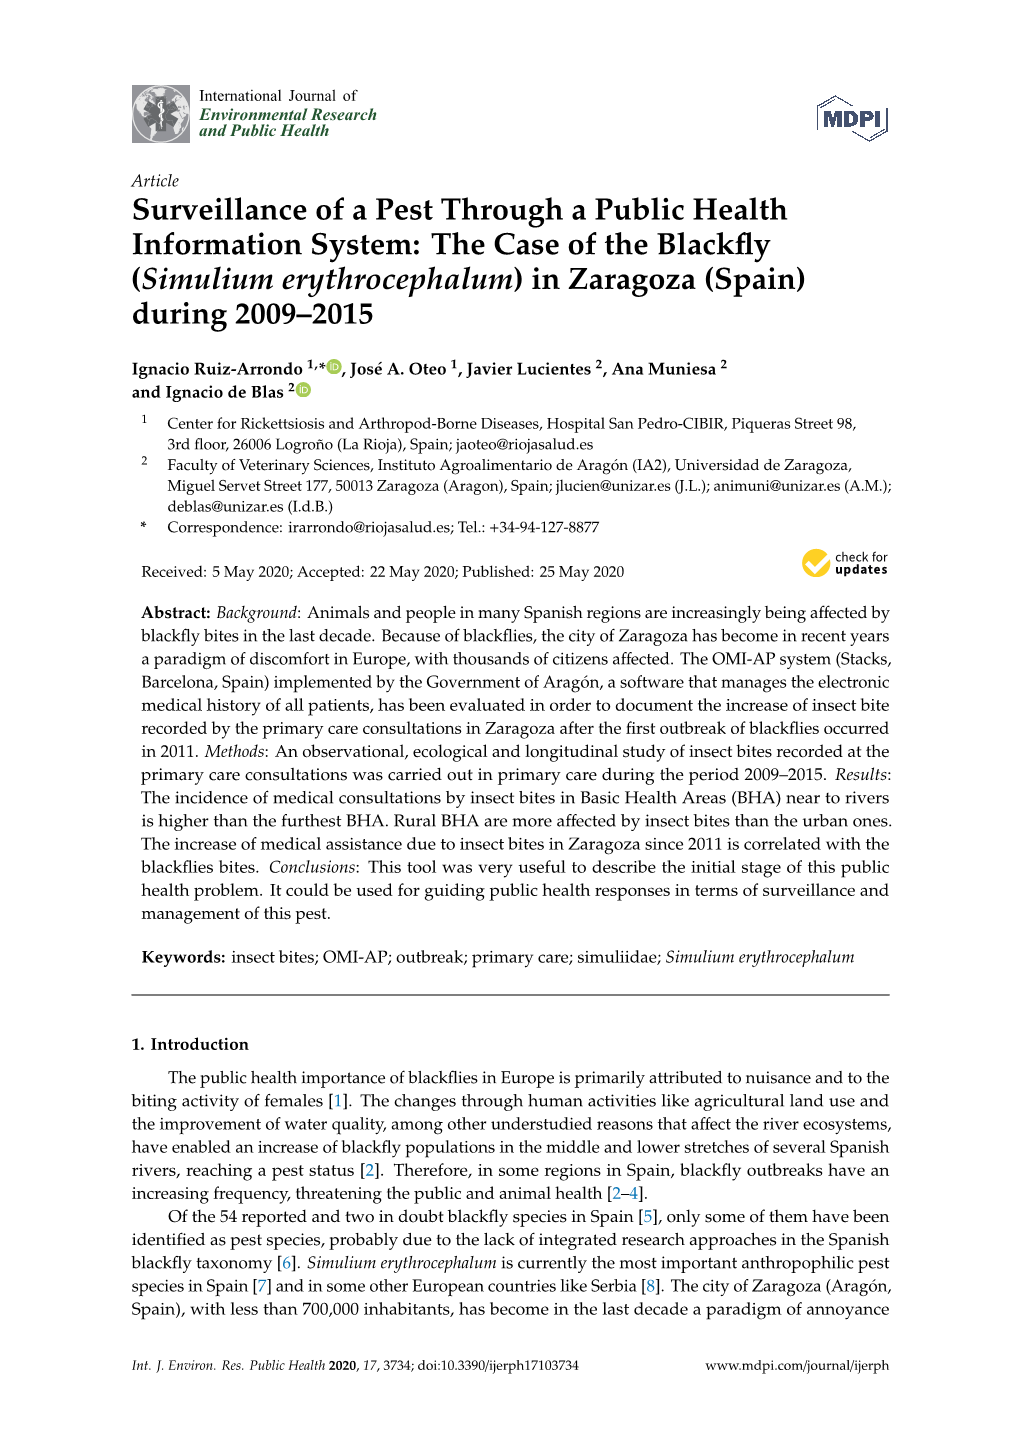 Surveillance of a Pest Through a Public Health Information System: the Case of the Blackﬂy (Simulium Erythrocephalum) in Zaragoza (Spain) During 2009–2015